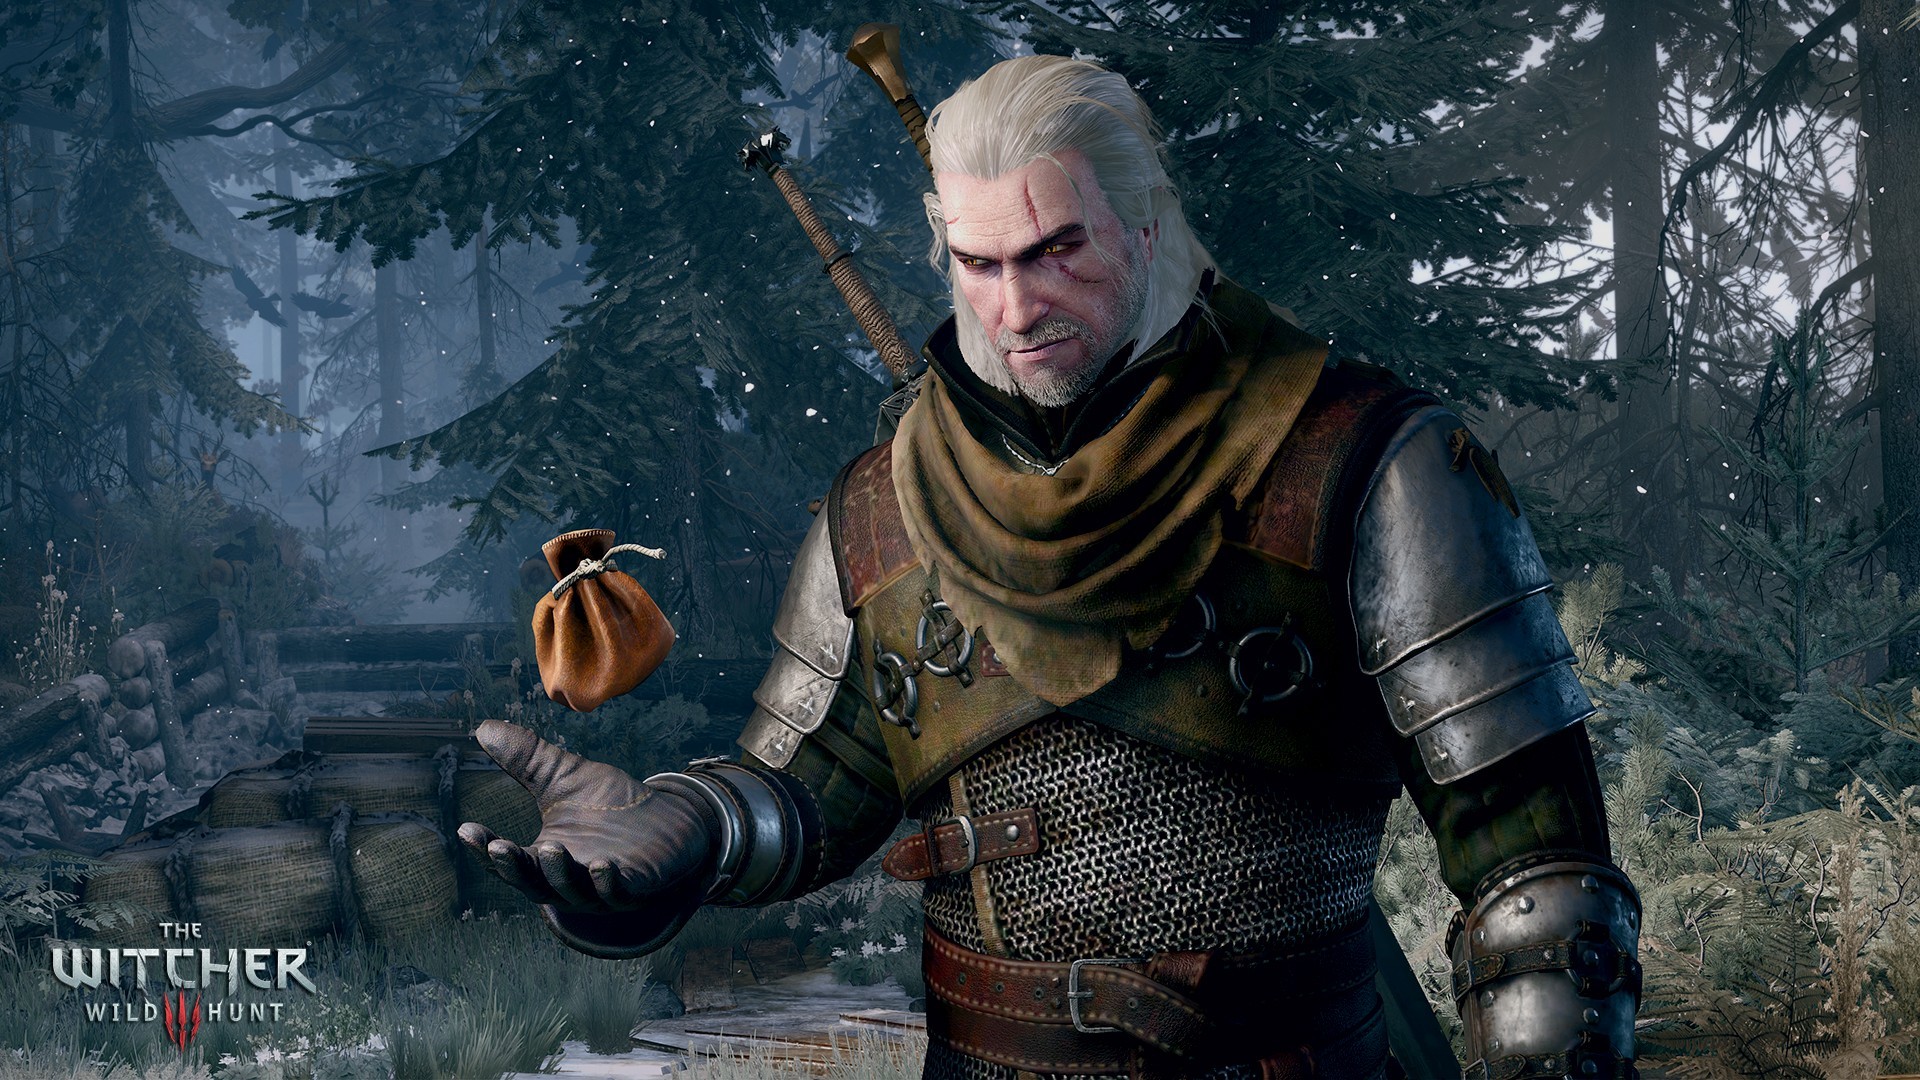 The-Witcher-3-Wild-Hunt-Gets-Stunning-New-Screenshots-Showing-Geralt-Enemies-and-More-471130-2.jpg